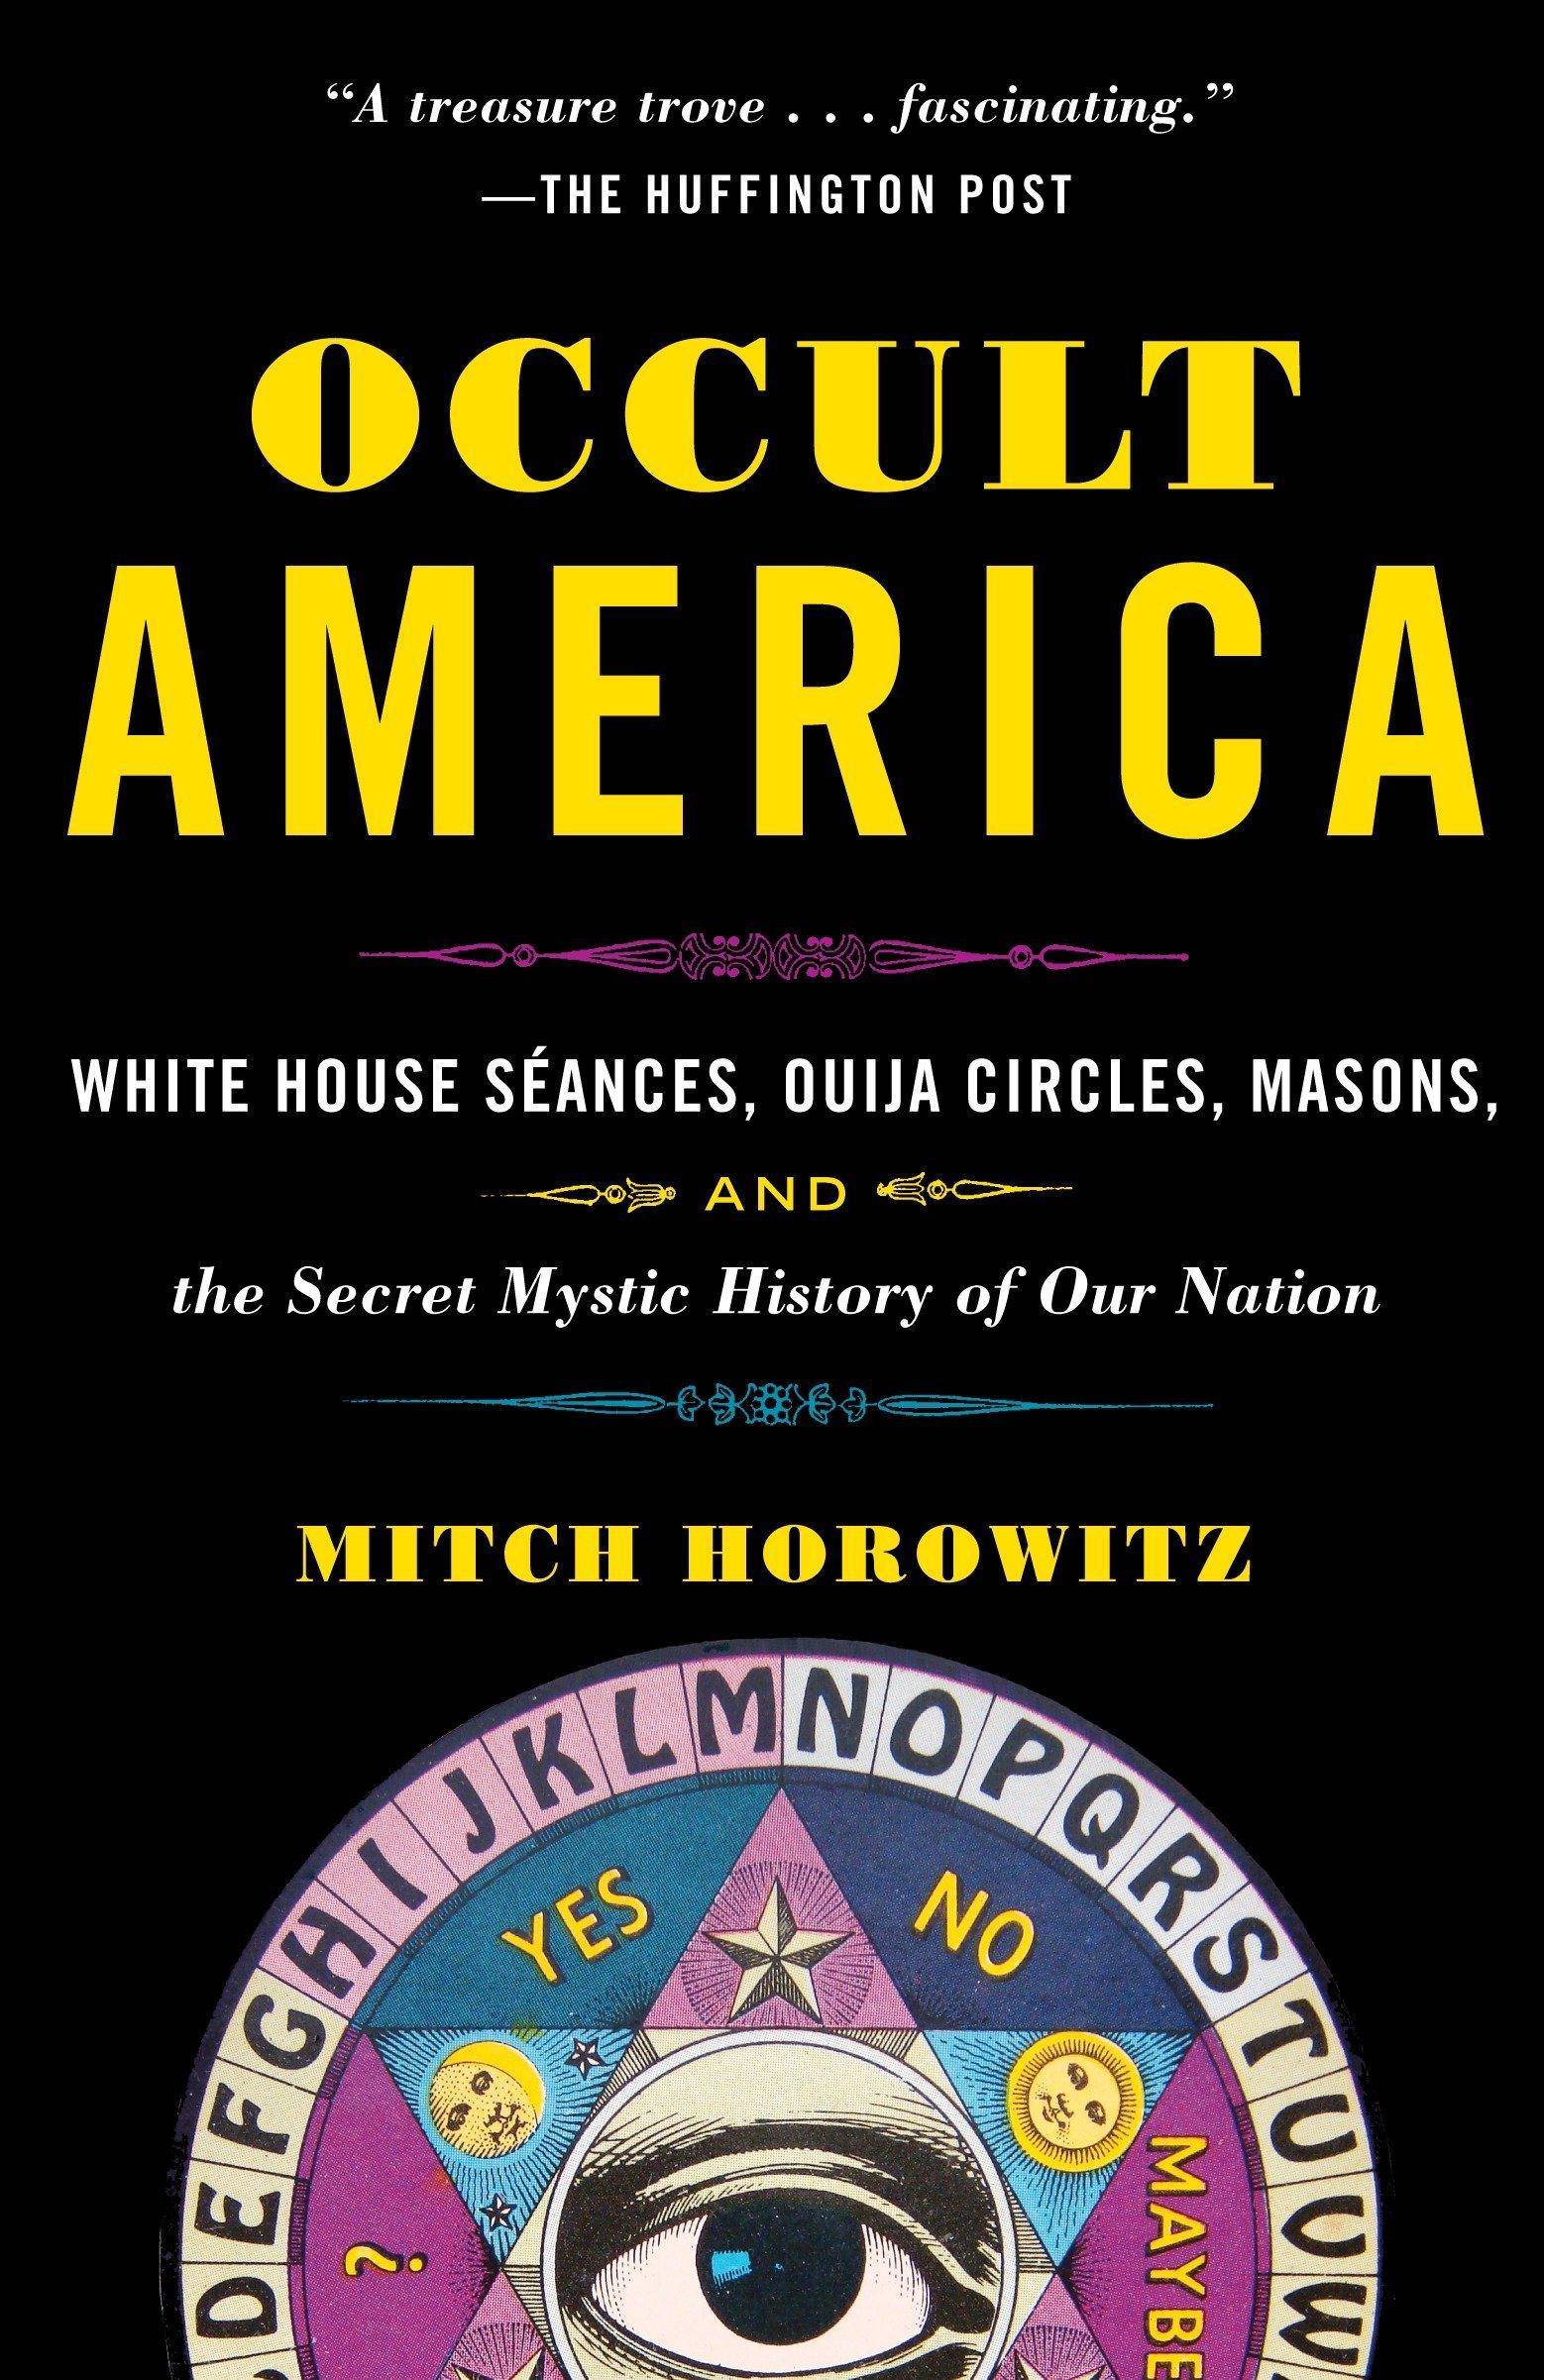 Occult America: White House Seances, Ouija Circles, Masons, and the Secret Mystic History of Our Nation - SureShot Books Publishing LLC